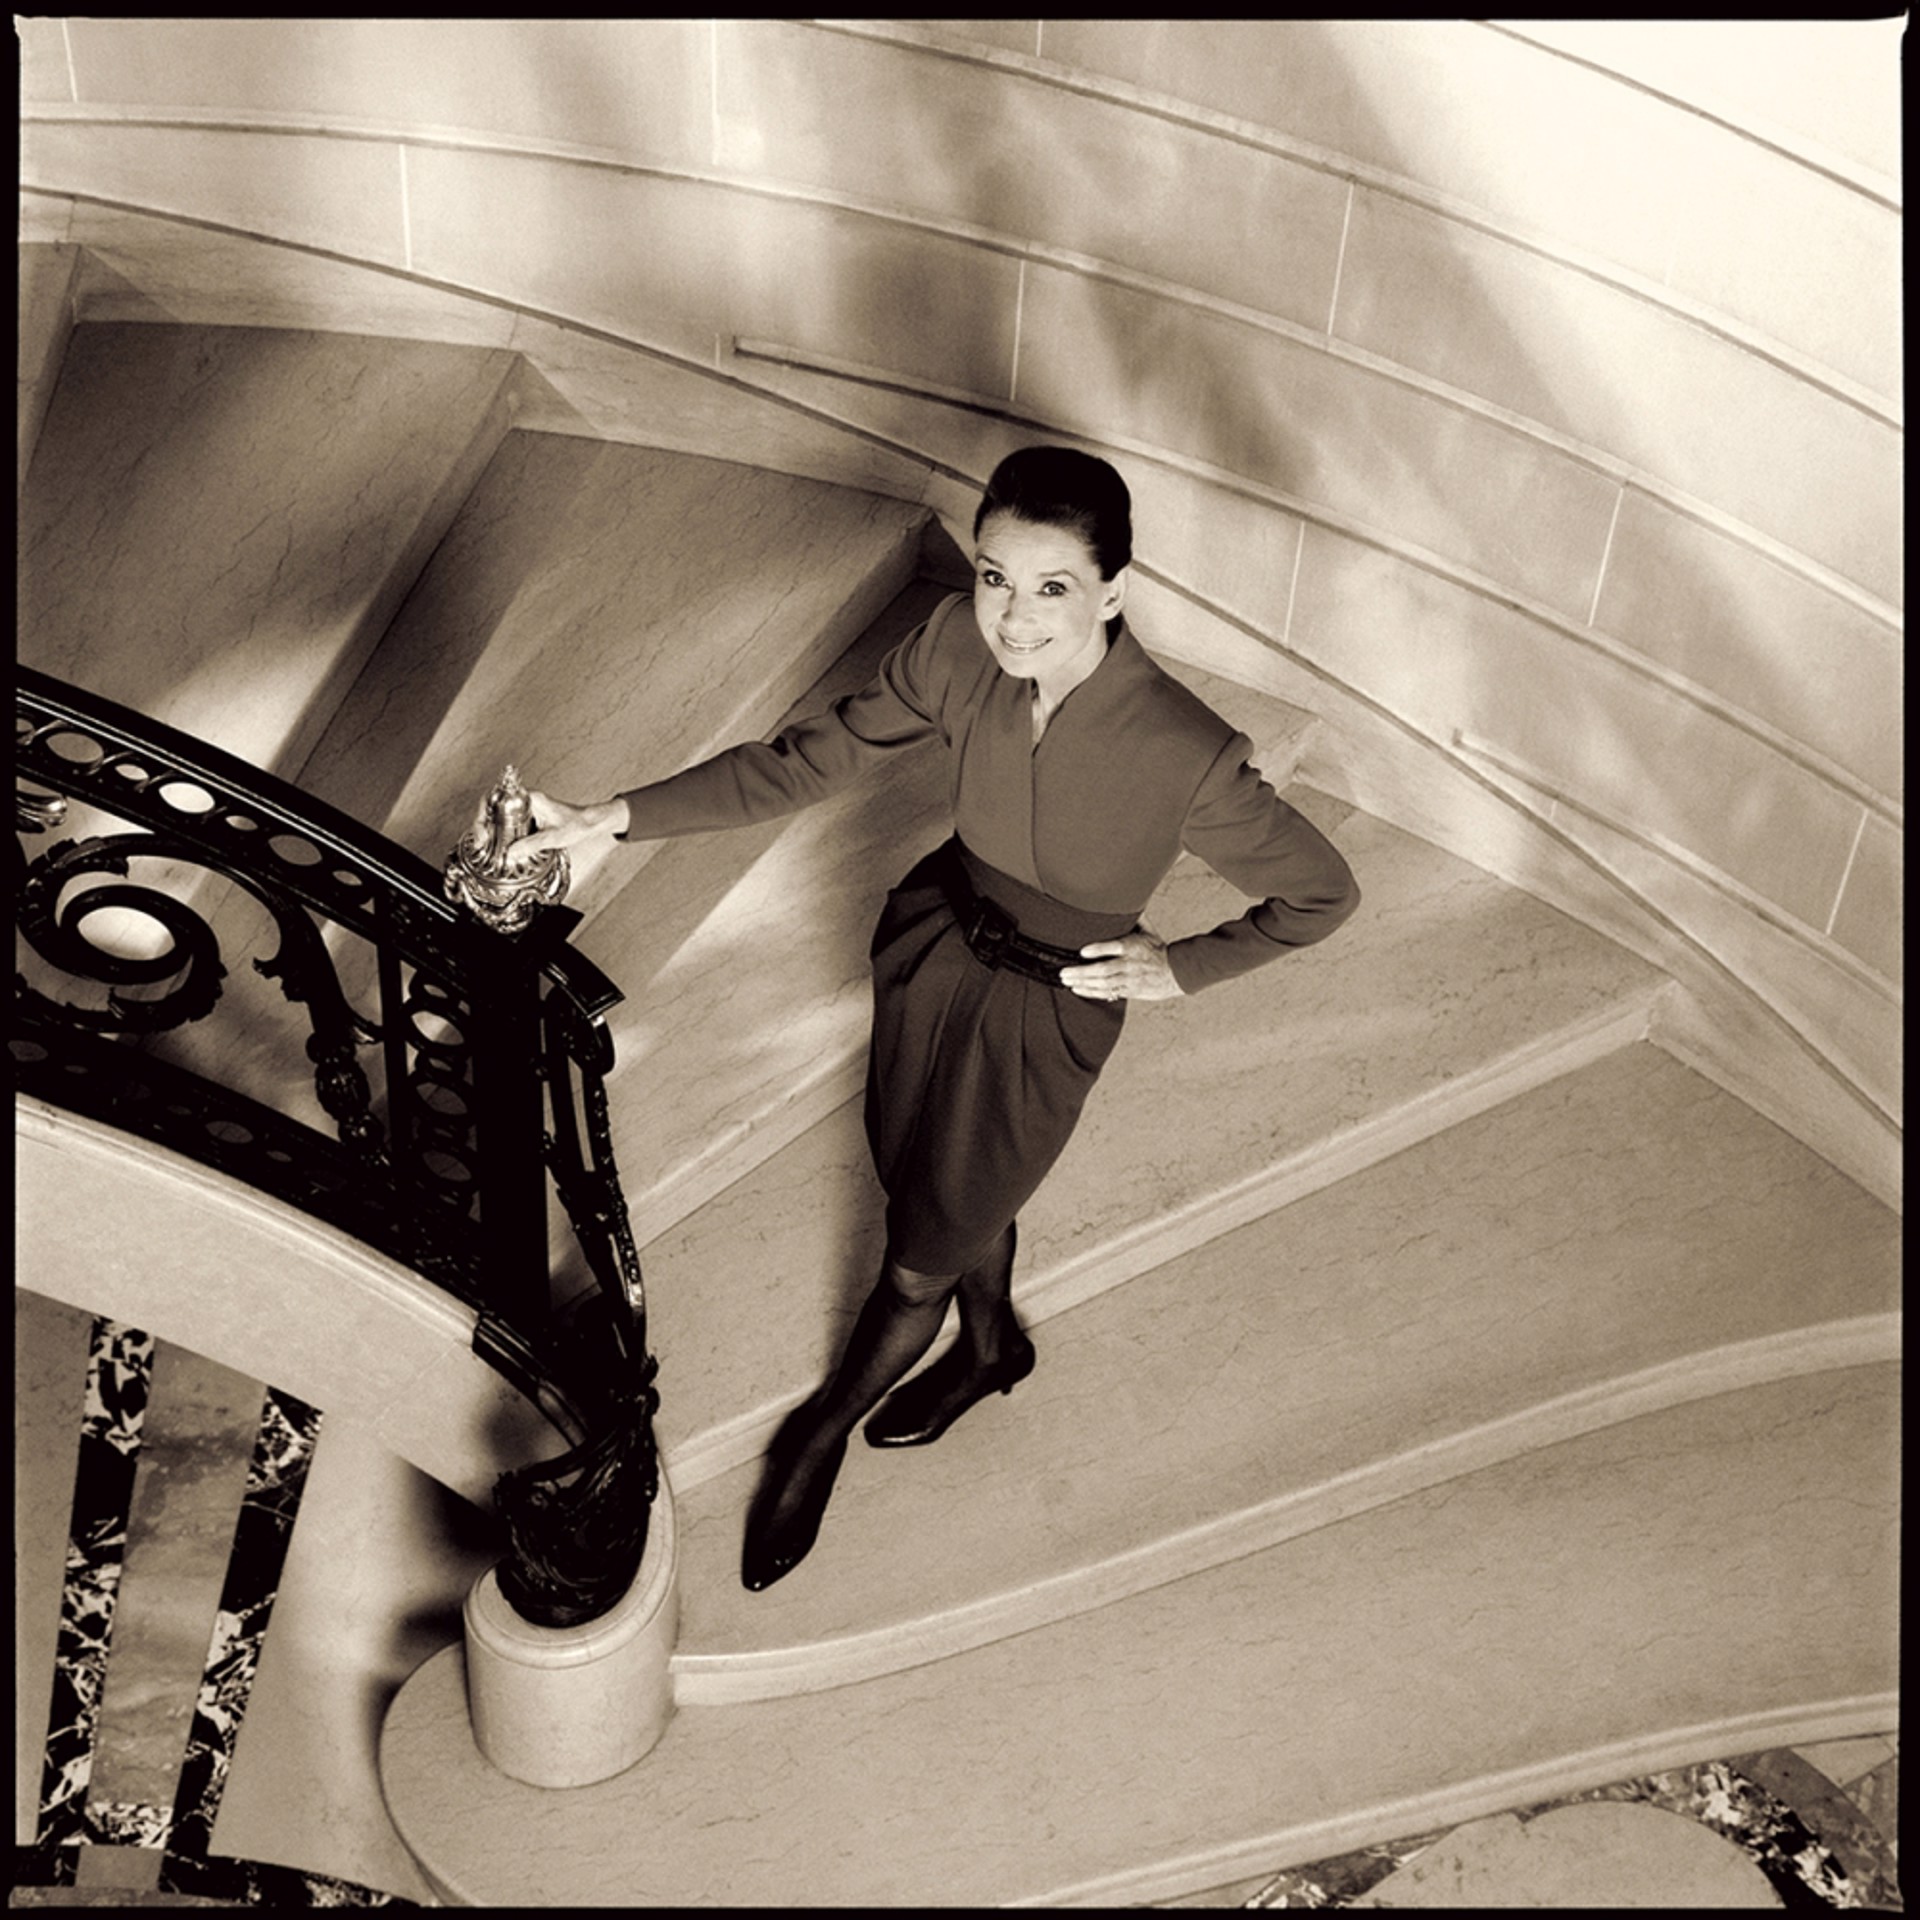 89003 Audrey Hepburn Smiling in Stairway Sepia by Timothy White